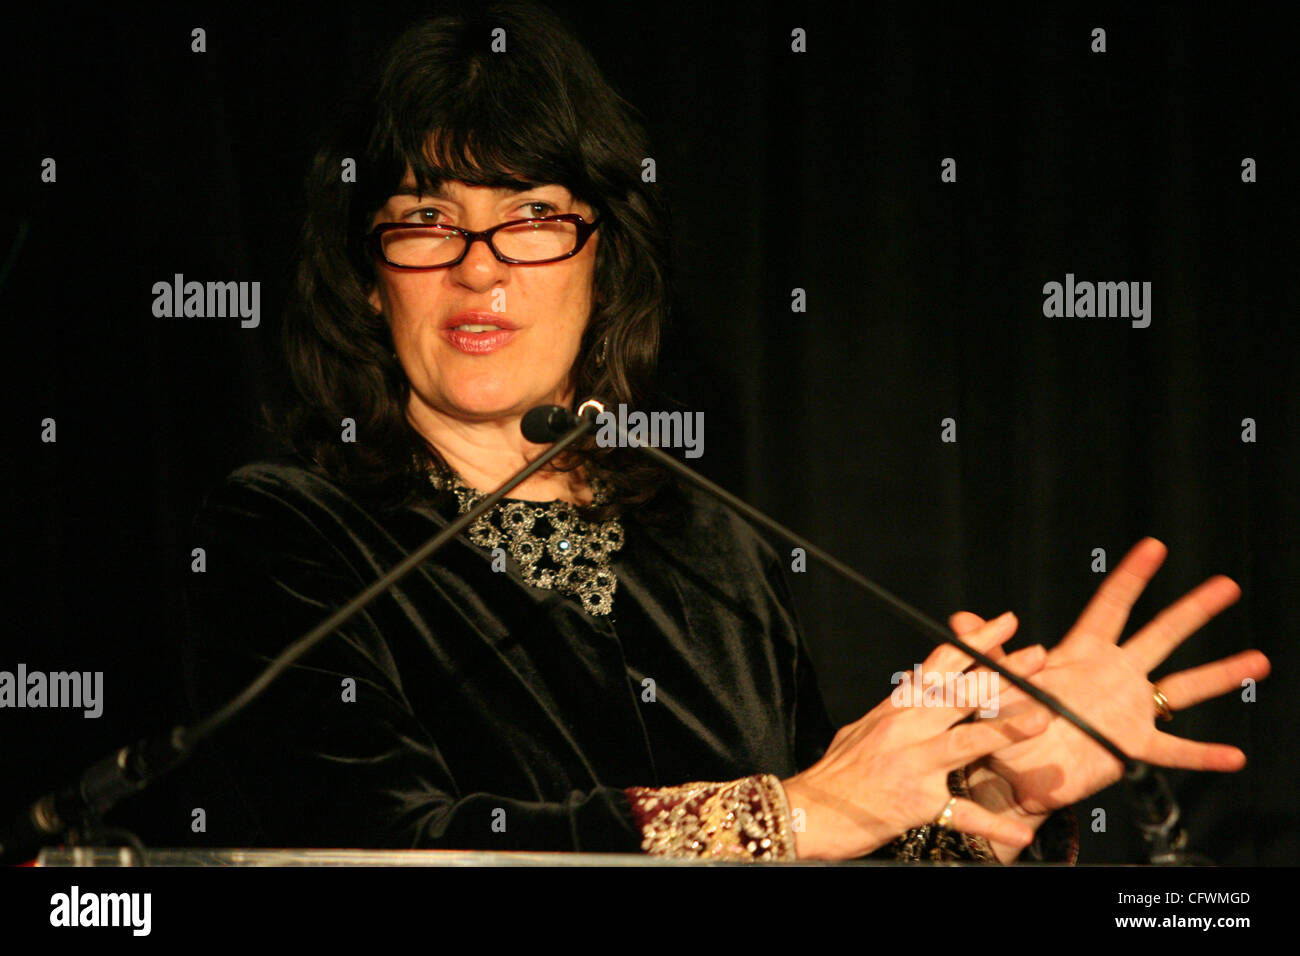 CNN Chief International Correspondent Christiane Amanpour  address as a keynote speaker for the 18th  Annual Scholarship Banquet of the 'National Association of Hispanic Journalists' event in Lower Manhattan March, 1st. 2007. Photo Credit: Mariela Lombard/ ZUMA Press. Stock Photo